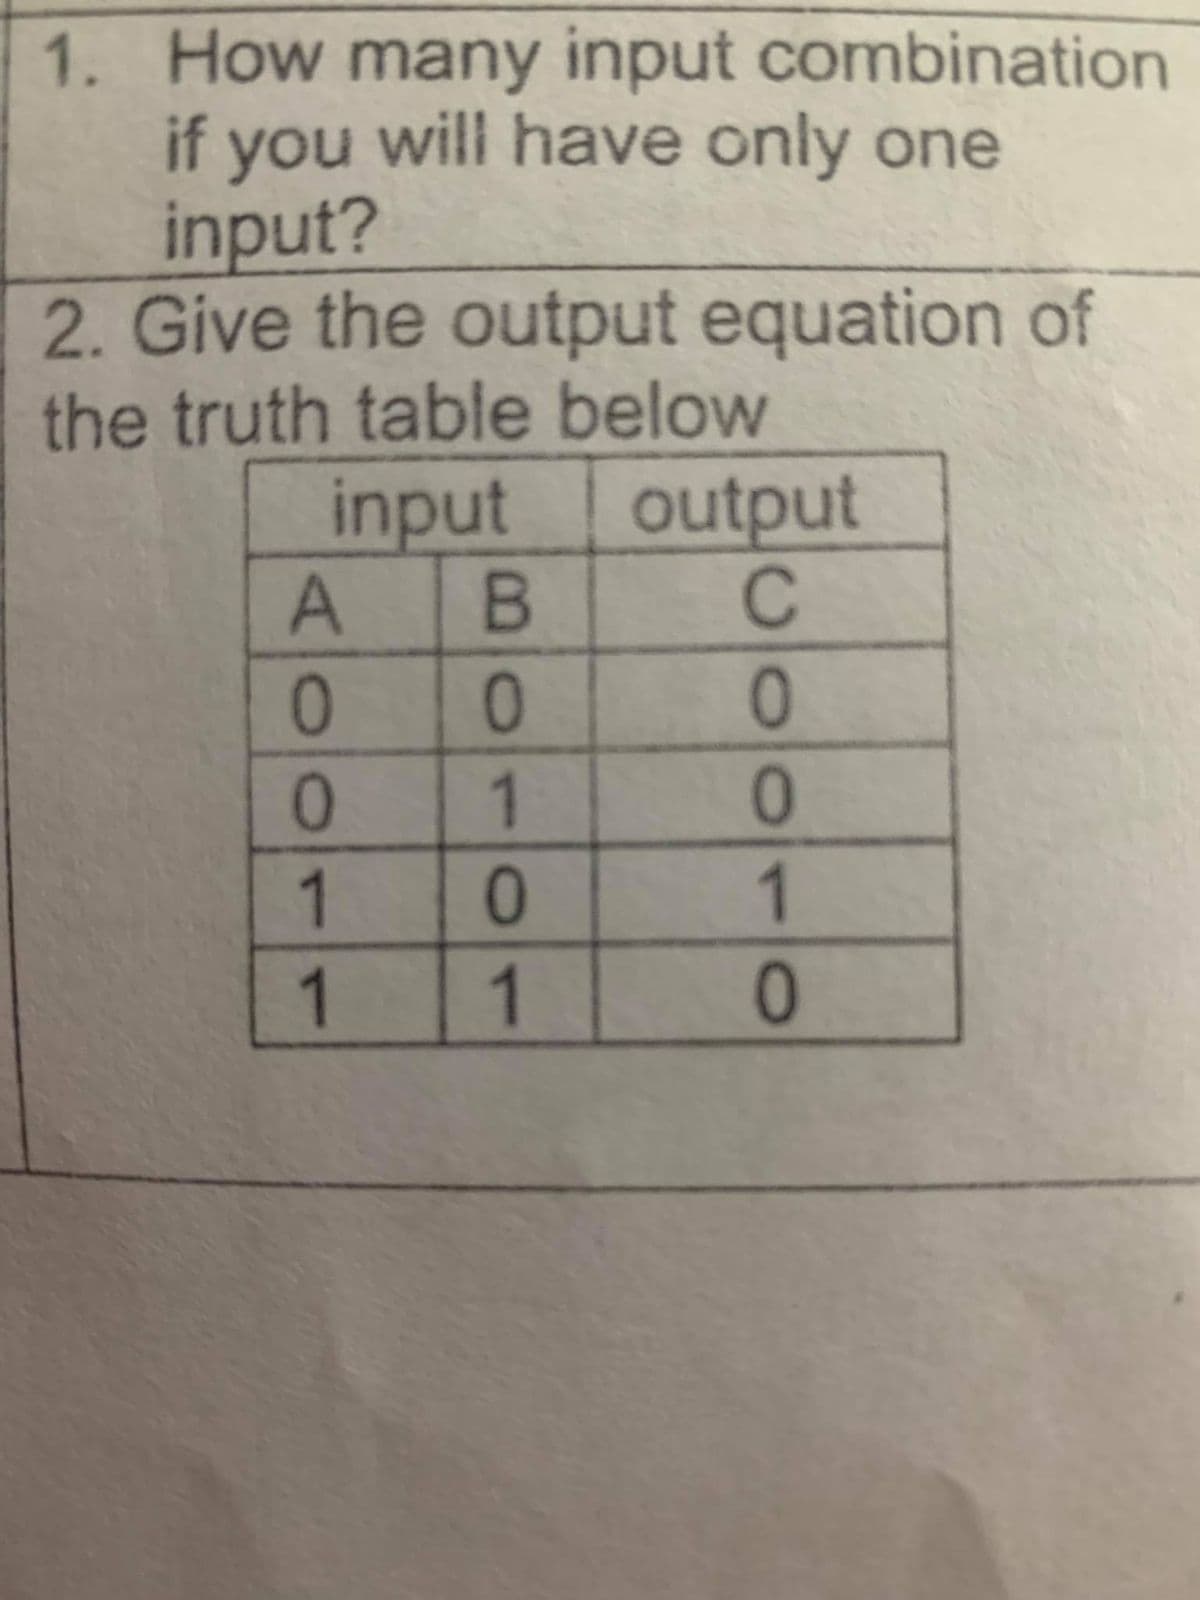 1. How many input combination
if will have only one
you
input?
2. Give the output equation of
the truth table below
input
output
B.
1
1
1
1
2010
AO0
